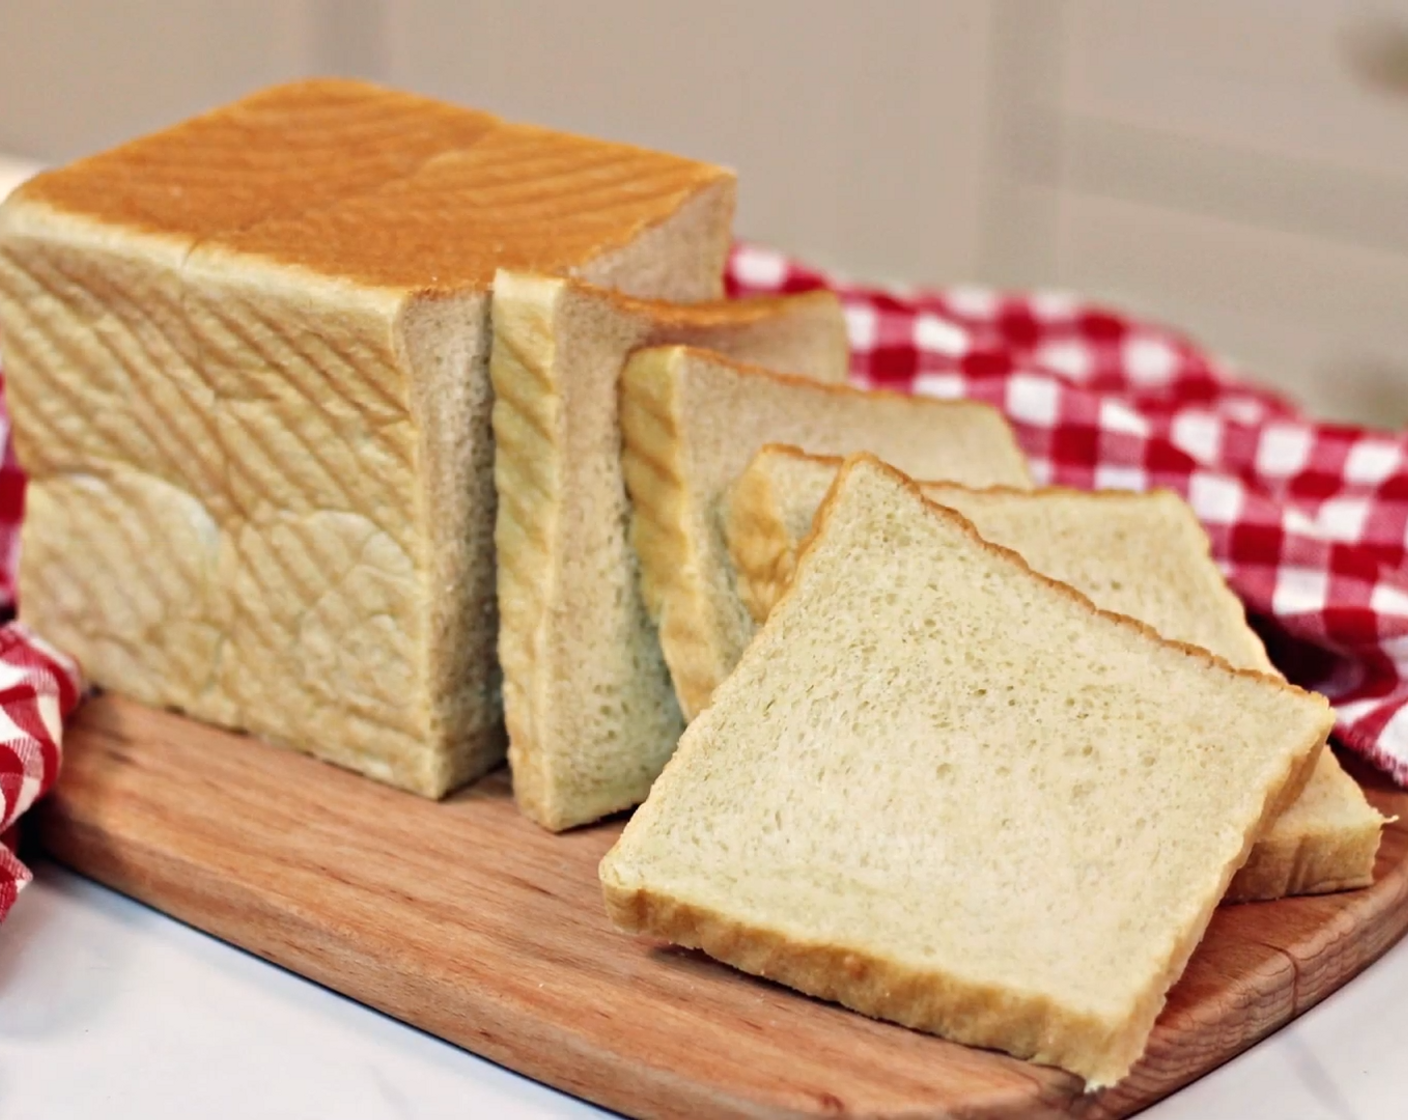 step 10 Once it is fully cooled, use a bread knife or an electric knife to slice the bread neatly in an orderly manner. Then wrap it up with a plastic wrap to store the bread.